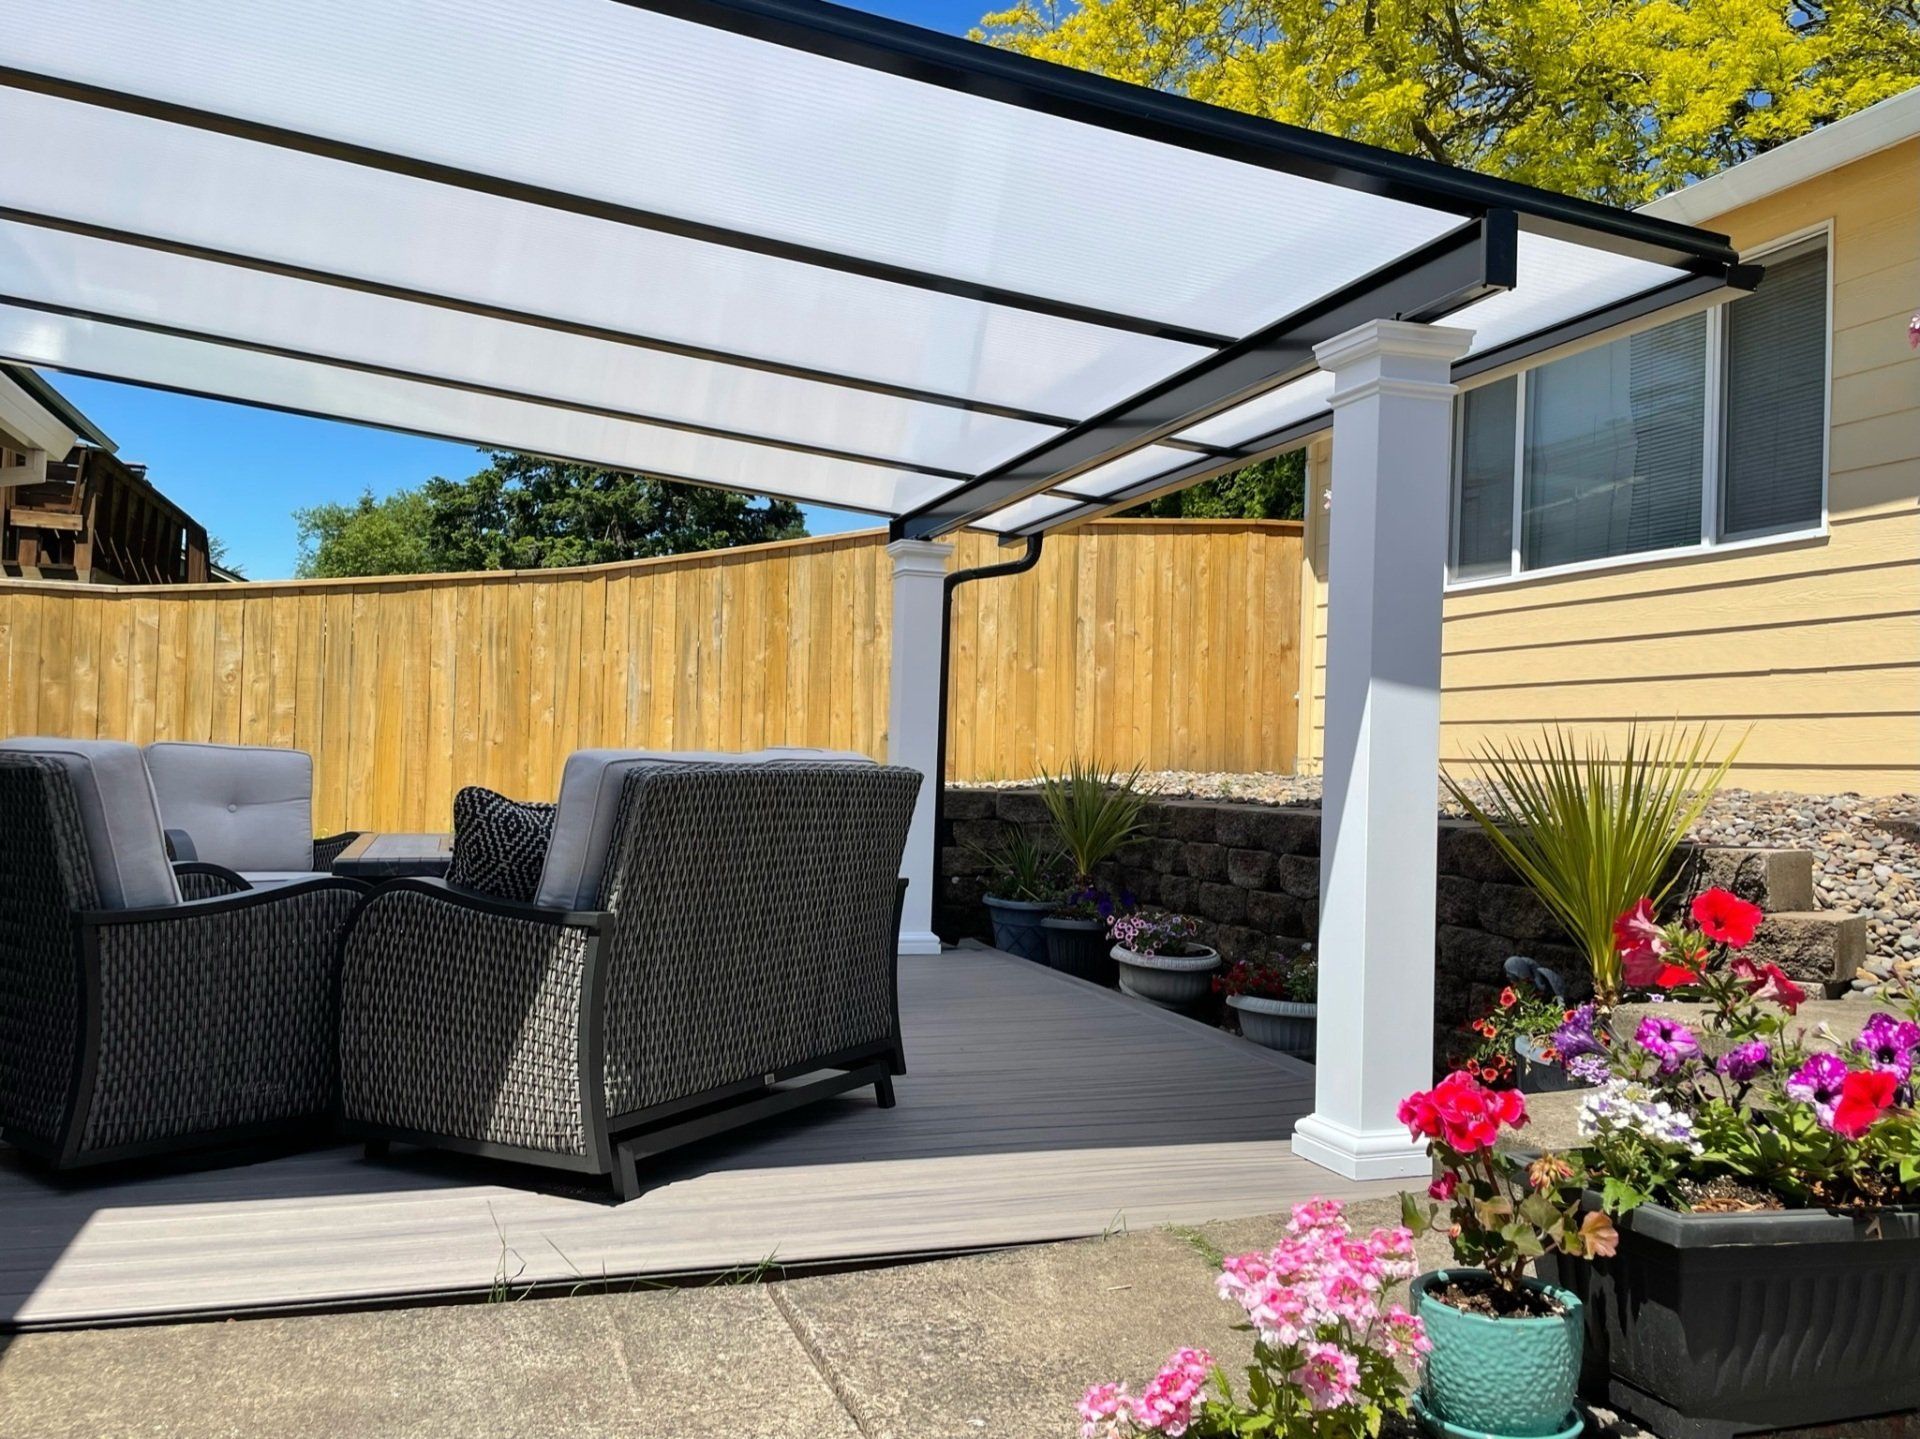 Acrylic Patio Covers Tigard Oregon - White Shed Style Roof in  White